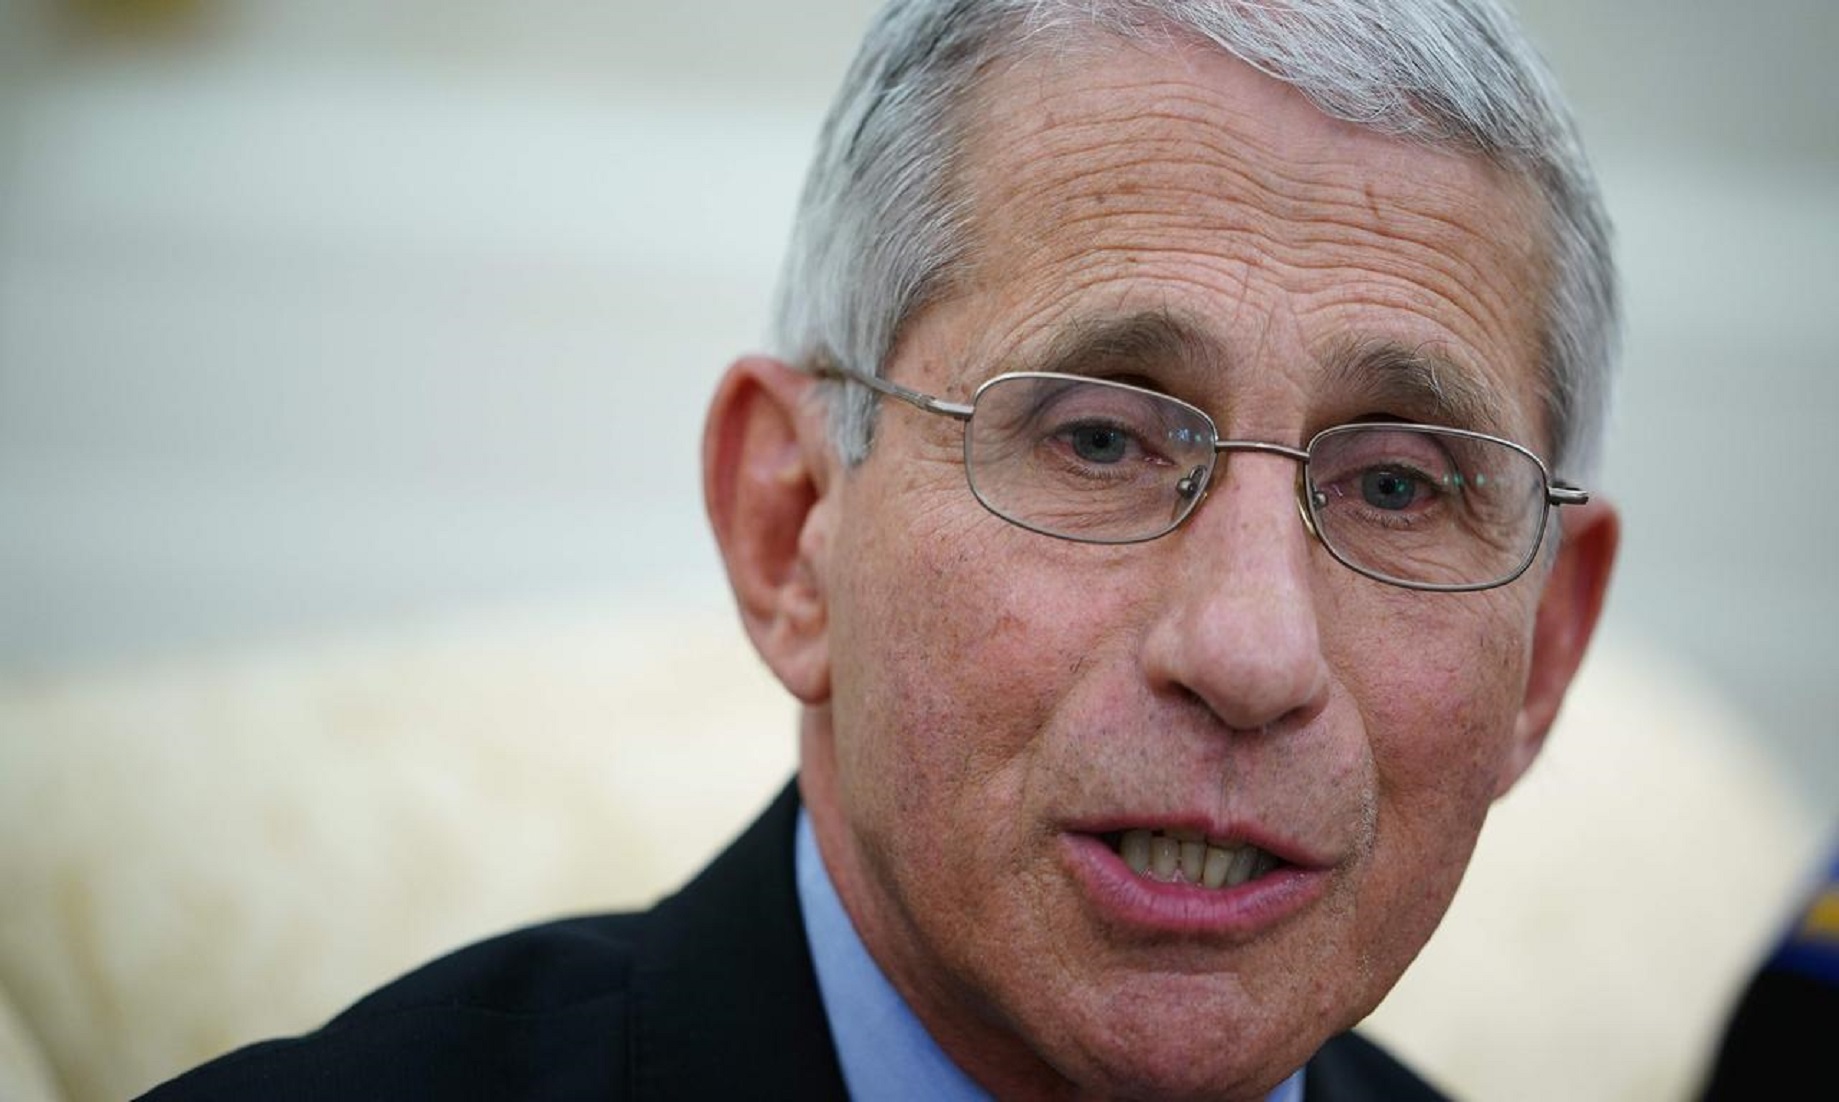 U.S. COVID-19 Cases Could Double To 200,000 Cases A Day In Fall: Fauci